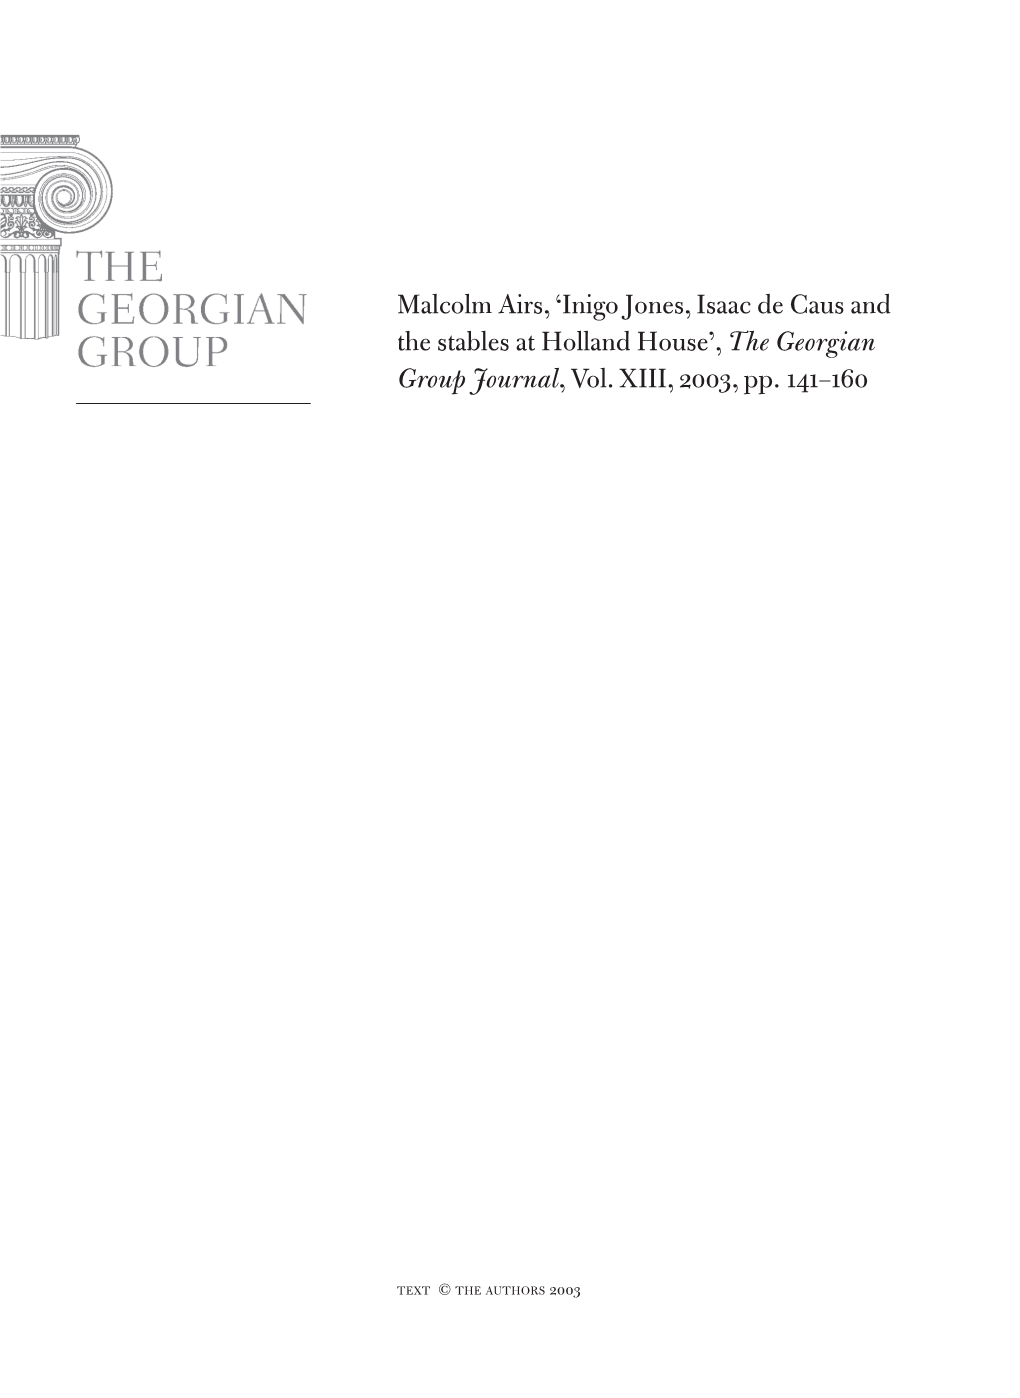 Malcolm Airs, 'Inigo Jones, Isaac De Caus and the Stables at Holland House', the Georgian Group Journal, Vol. Xiii, 2003, Pp